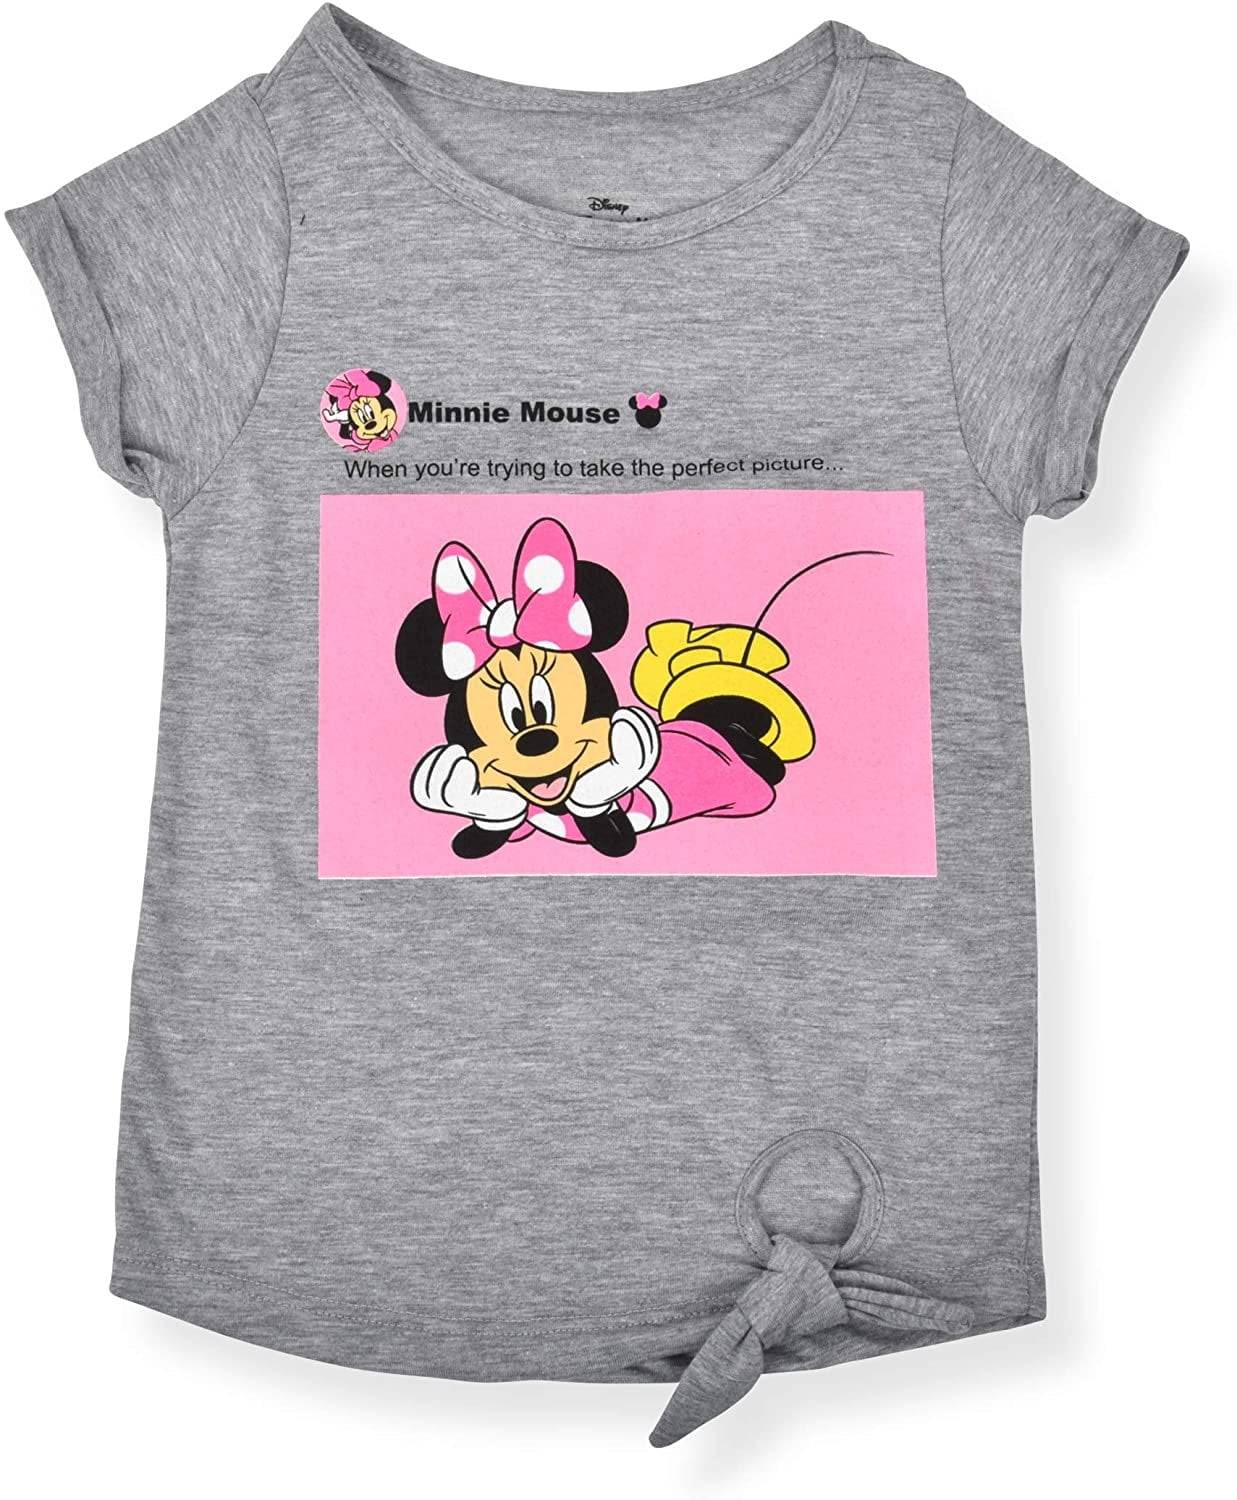 Disney Minnie Mouse Girls 2-Piece Perfect Picture Shorts and Graphic Tee Shirt Set Grey//Pink